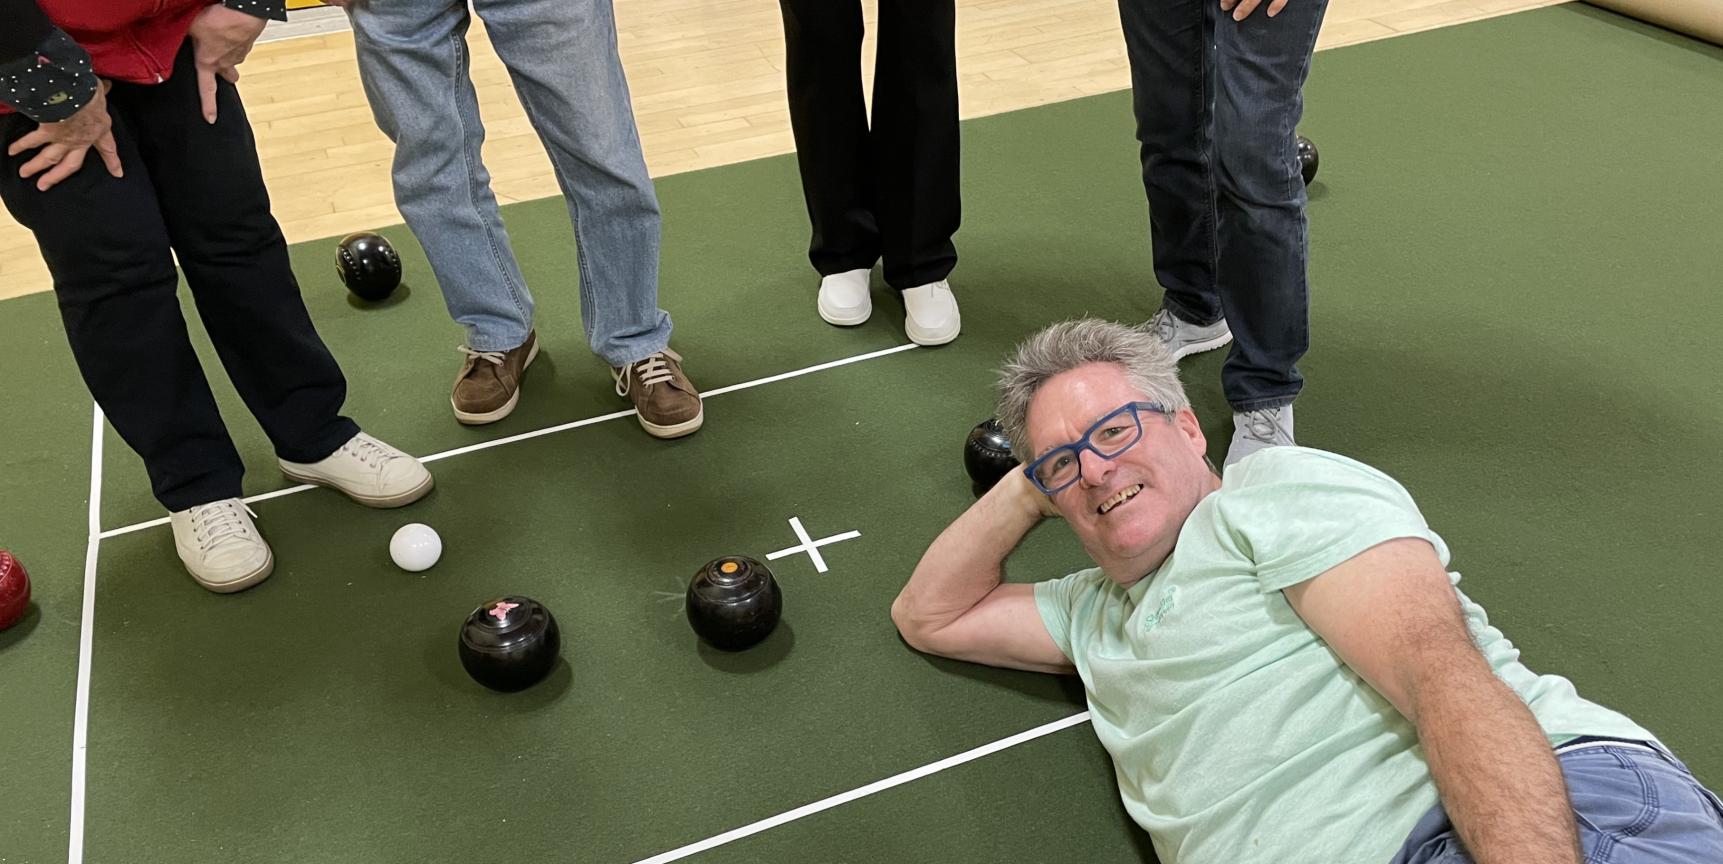 Bowled Over! Strathpeffer Indoor Bowling Club